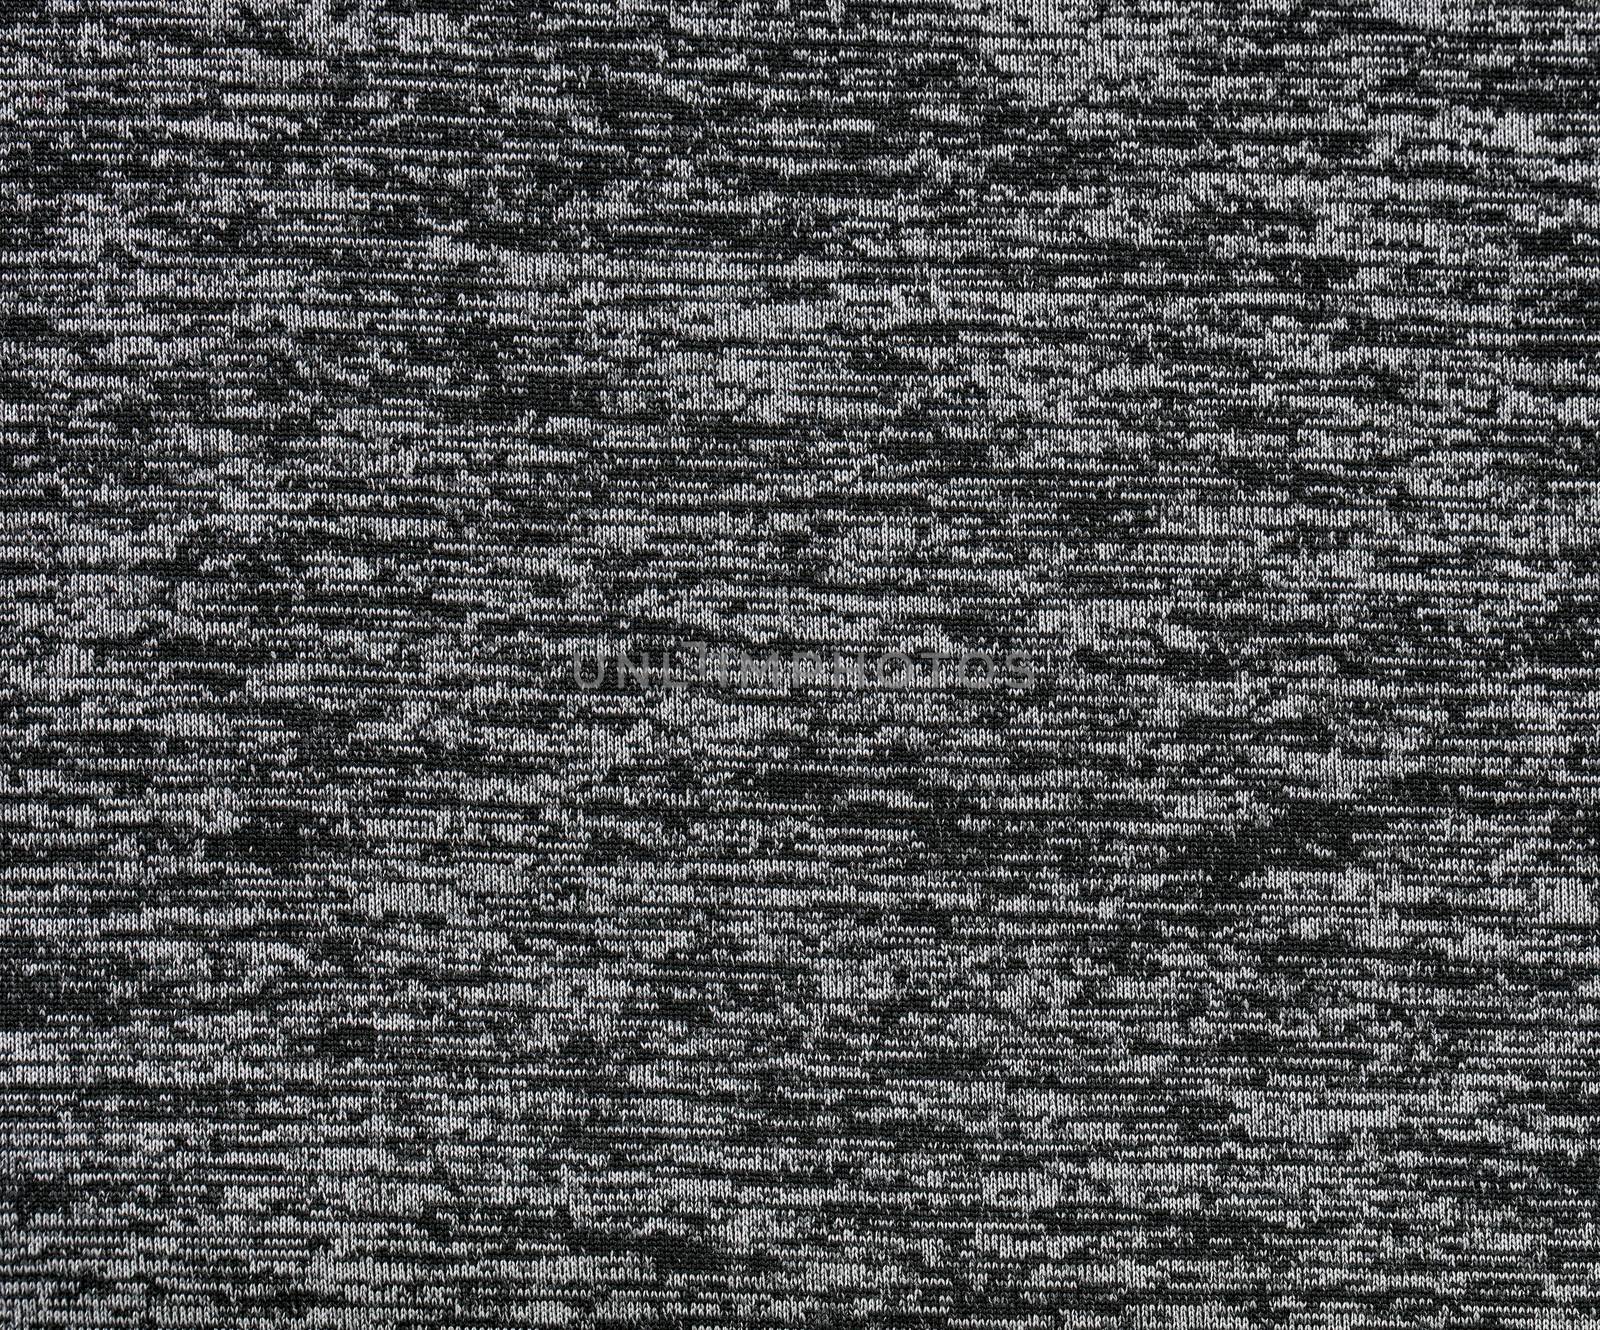 Background of dark cloth patterns in black and gray